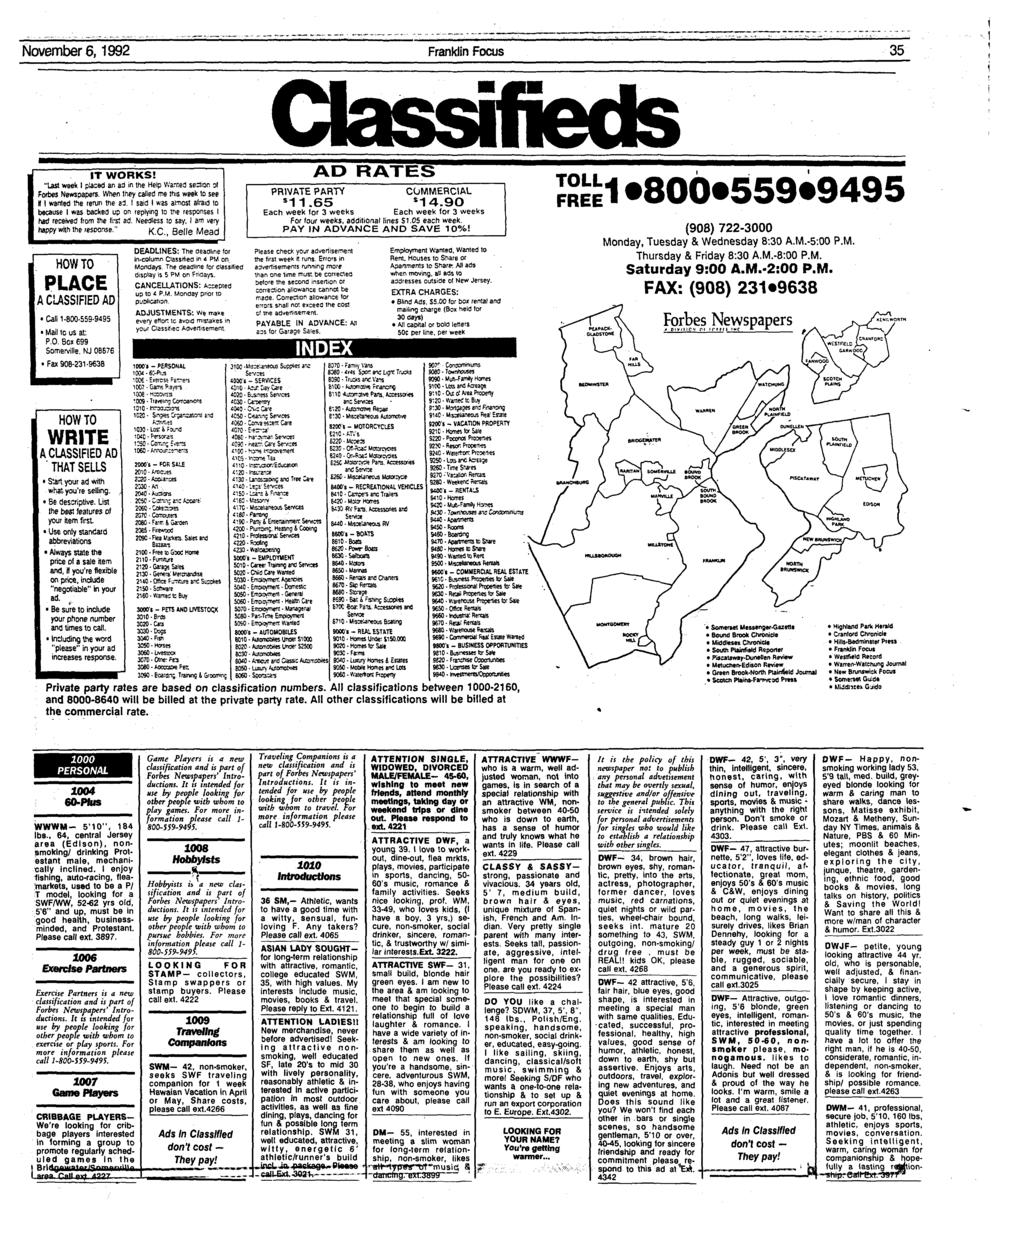 Novembers, 1992 Franklin Focus 35 Classifieds IT WORKS! "Last week I placed an ad in the Help Wanted sector; of Forbes Newspapers. When they called me this week to see If I wanted the rerun the»i.